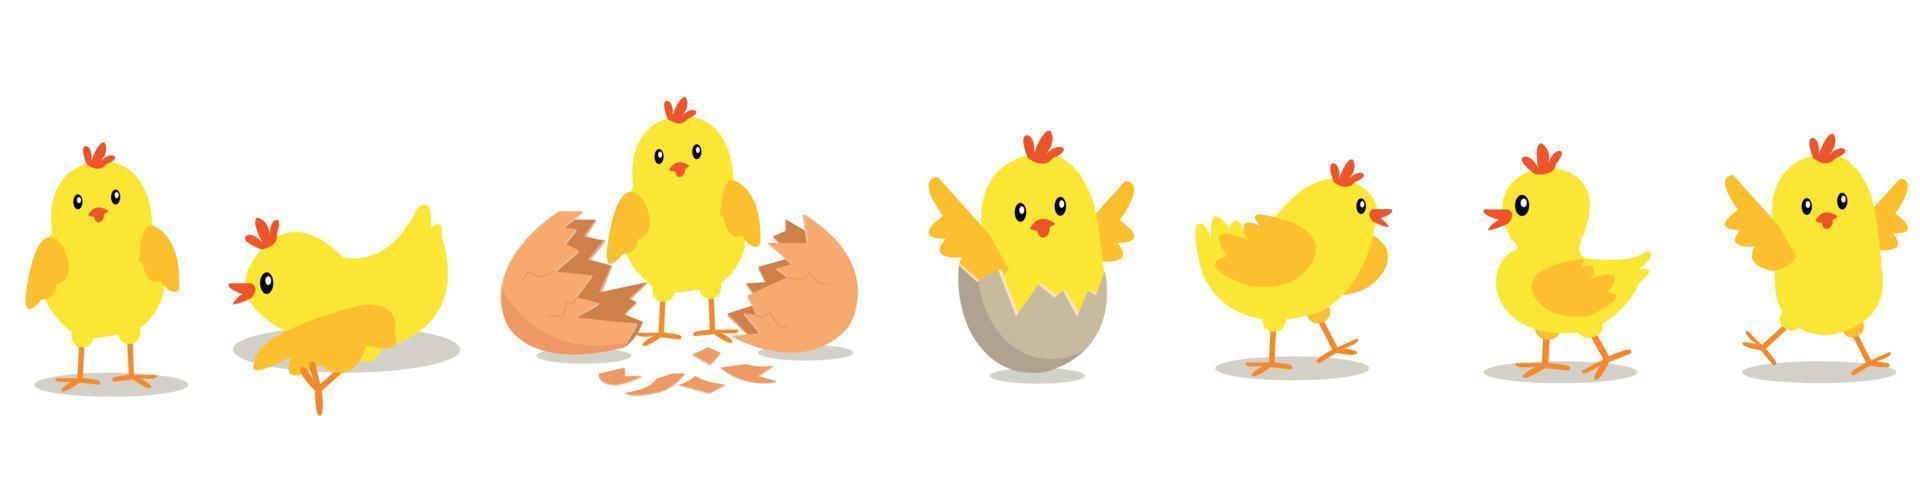 Chicken hatching from the egg. Cartoon baby chick birthday step-by-step process. Funny and educational illustration for kids. vector